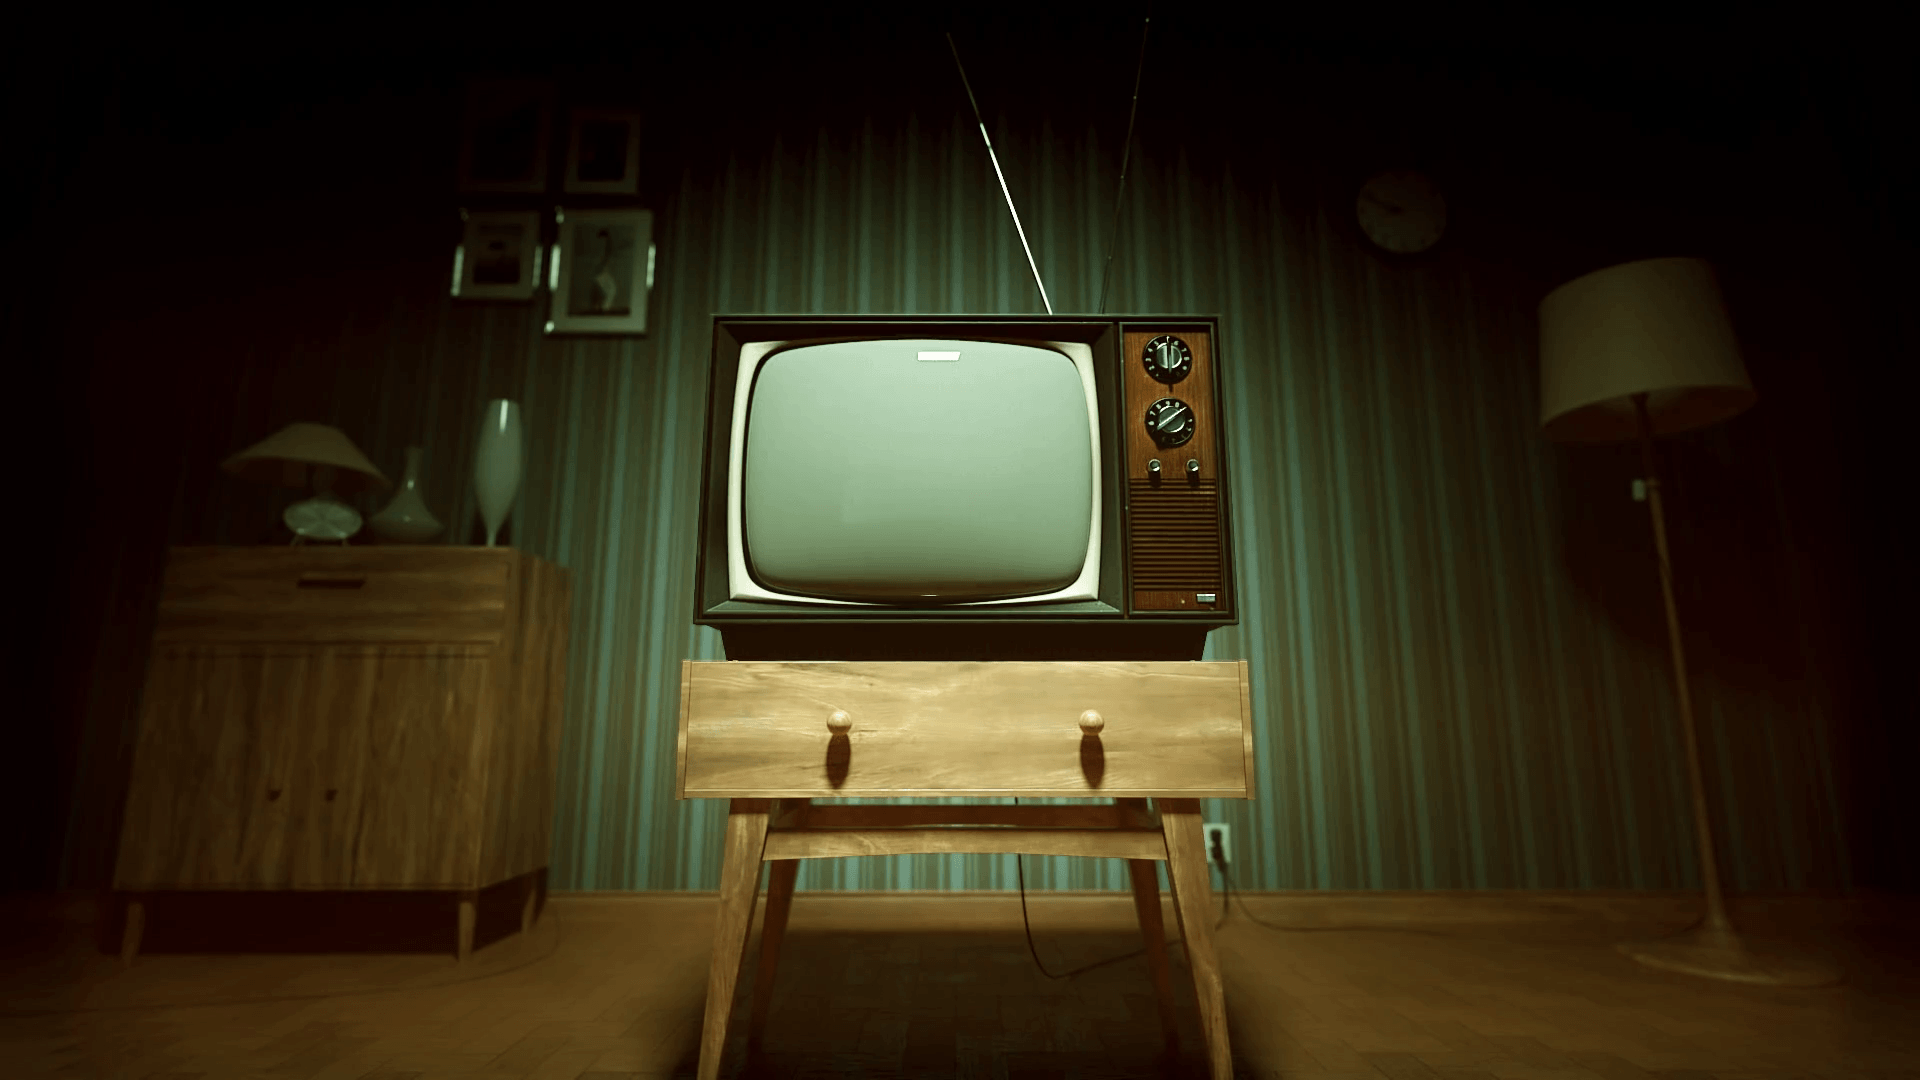 36300 Old Tv Stock Photos Pictures  RoyaltyFree Images  iStock  Tube  tv Tv Vintage tv